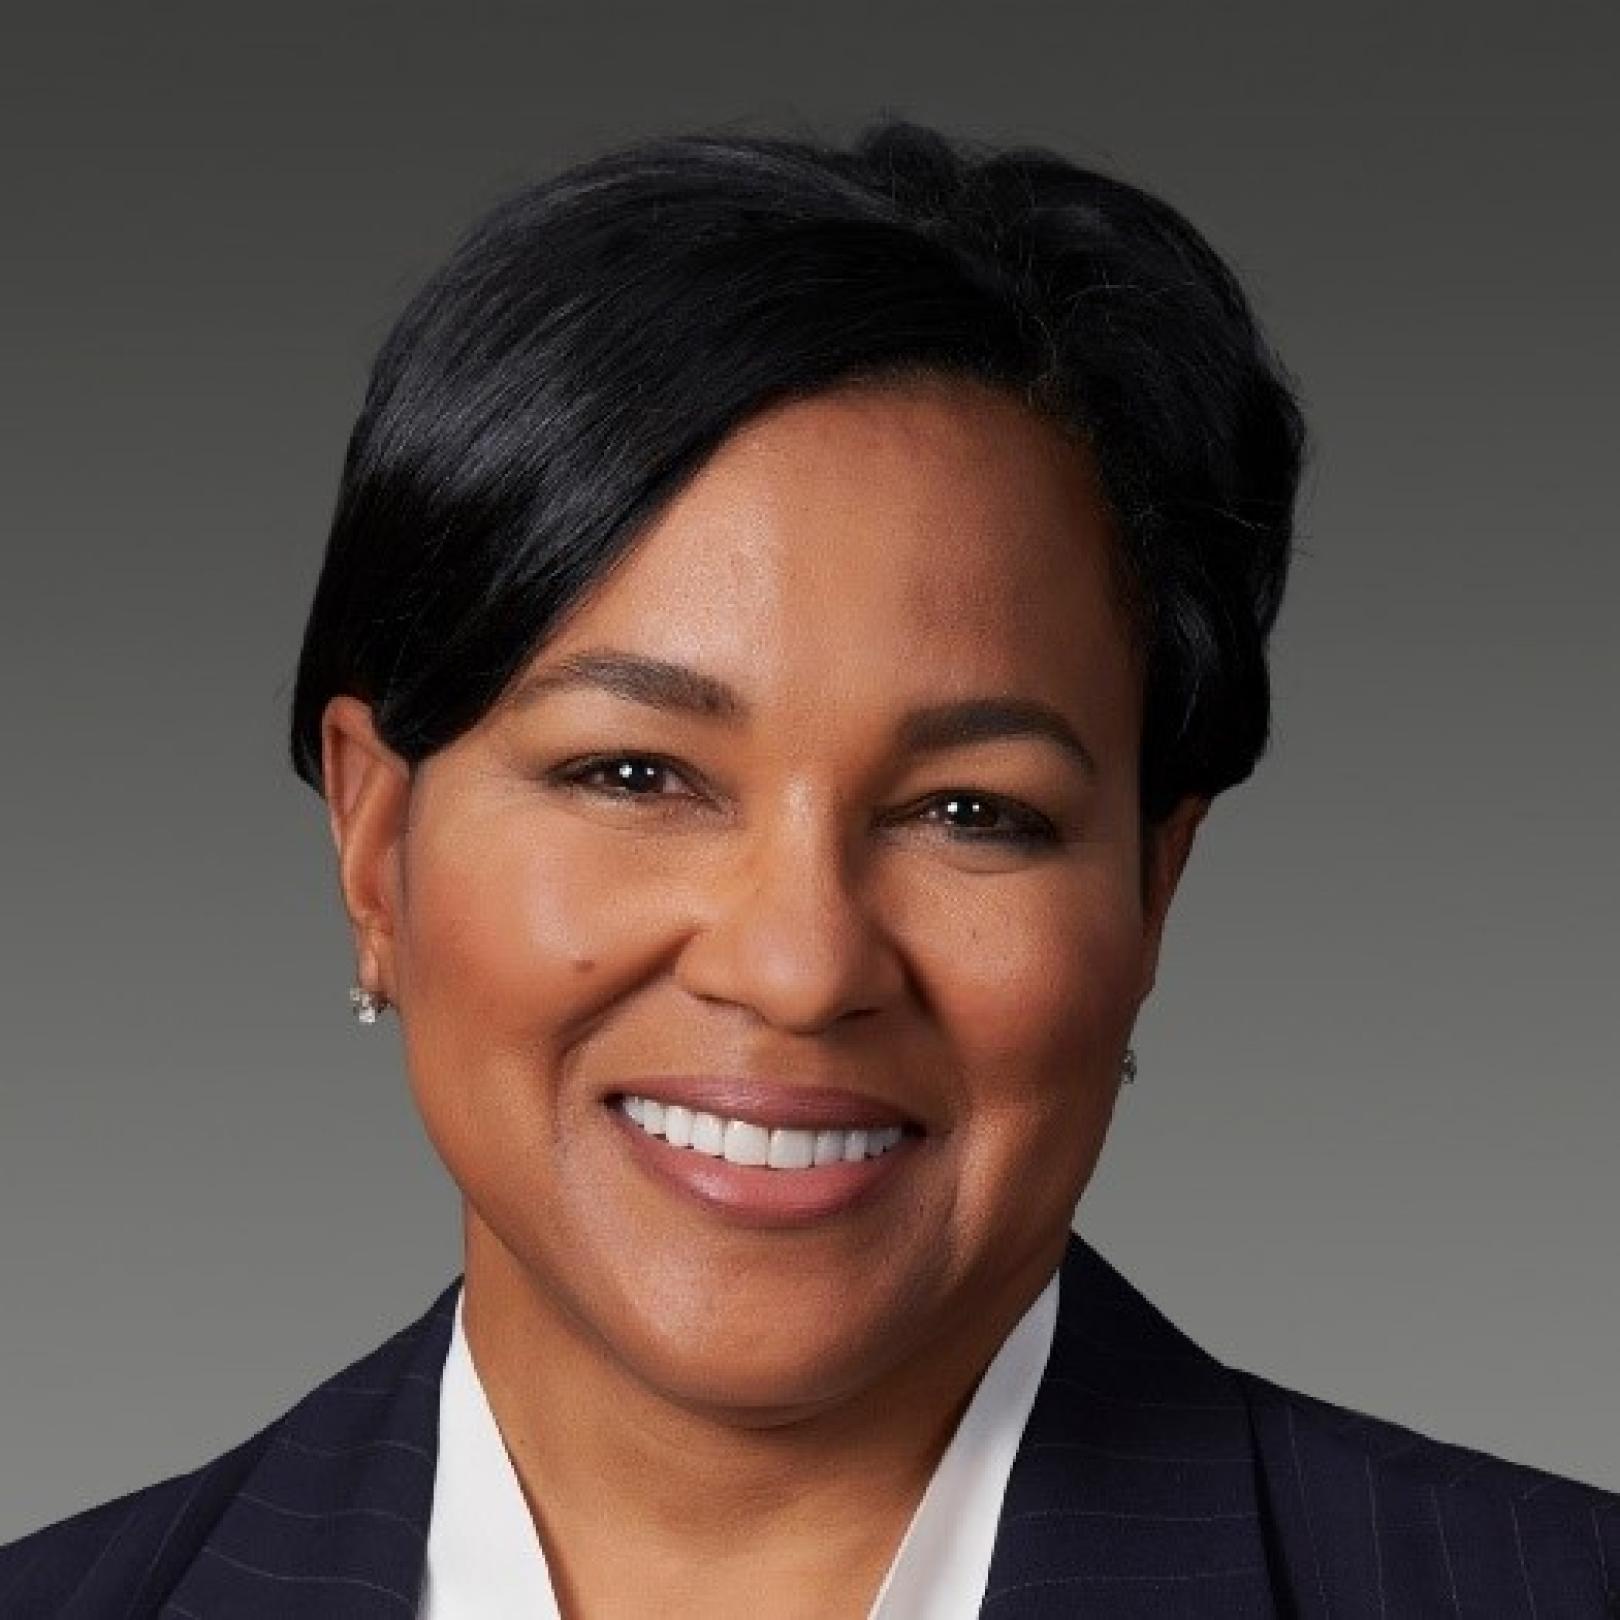 WBA Appoints Rosalind Brewer as CEO